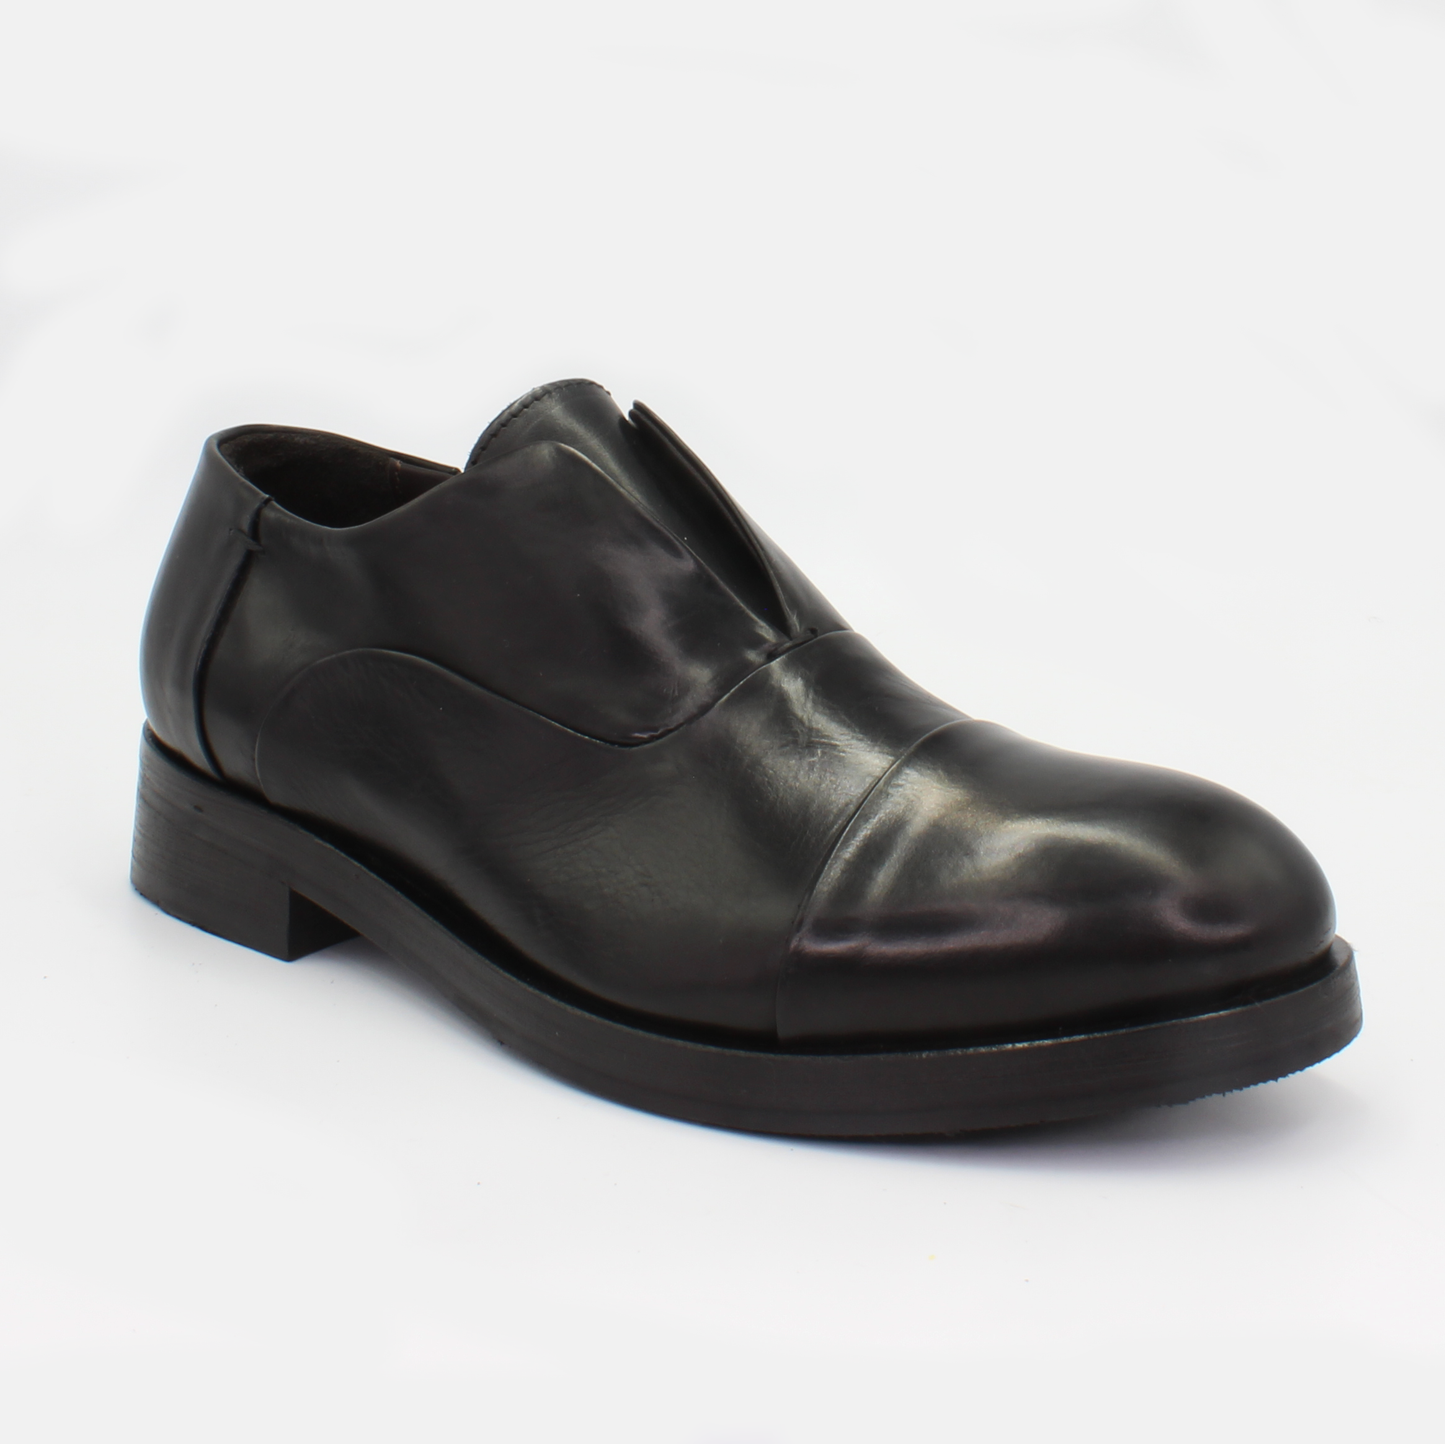 Shop Handmade Italian Leather Oxford in Nero (JP35773/8) or browse our range of hand-made Italian shoes in leather or suede in-store at Aliverti Cape Town, or shop online. We deliver in South Africa & offer multiple payment plans as well as accept multiple safe & secure payment methods.